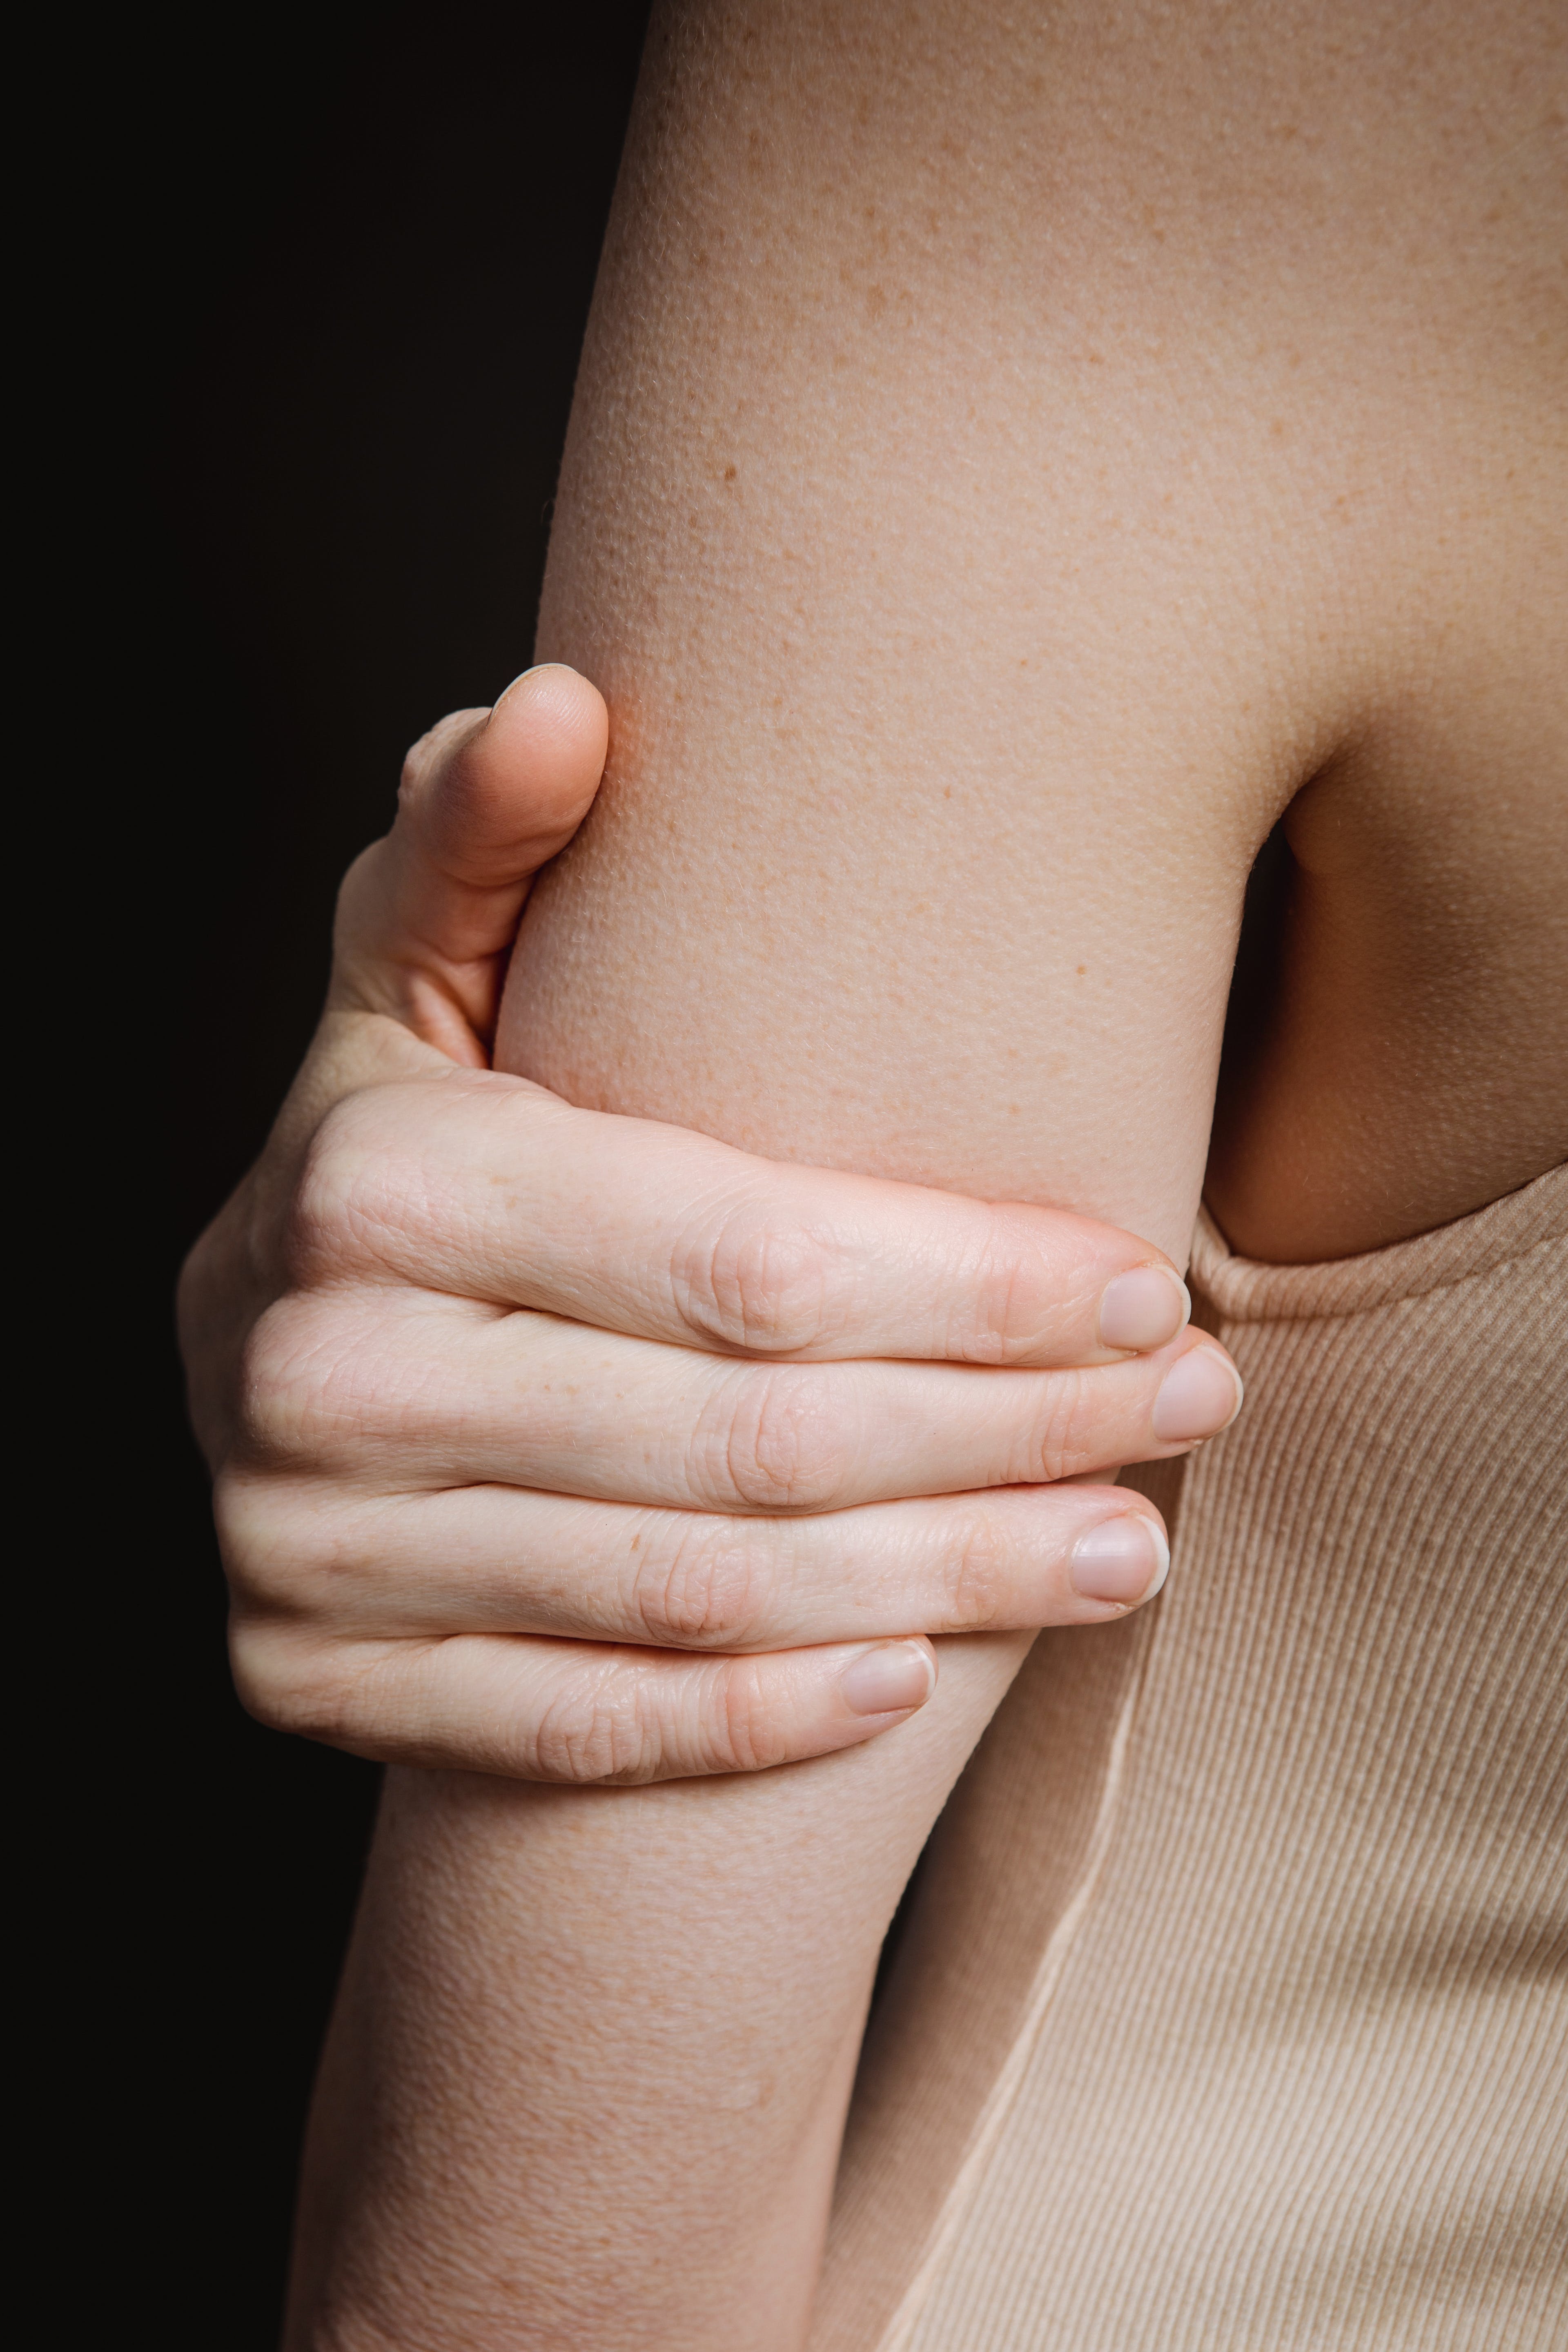 A person holding their arm. | Source: Pexels